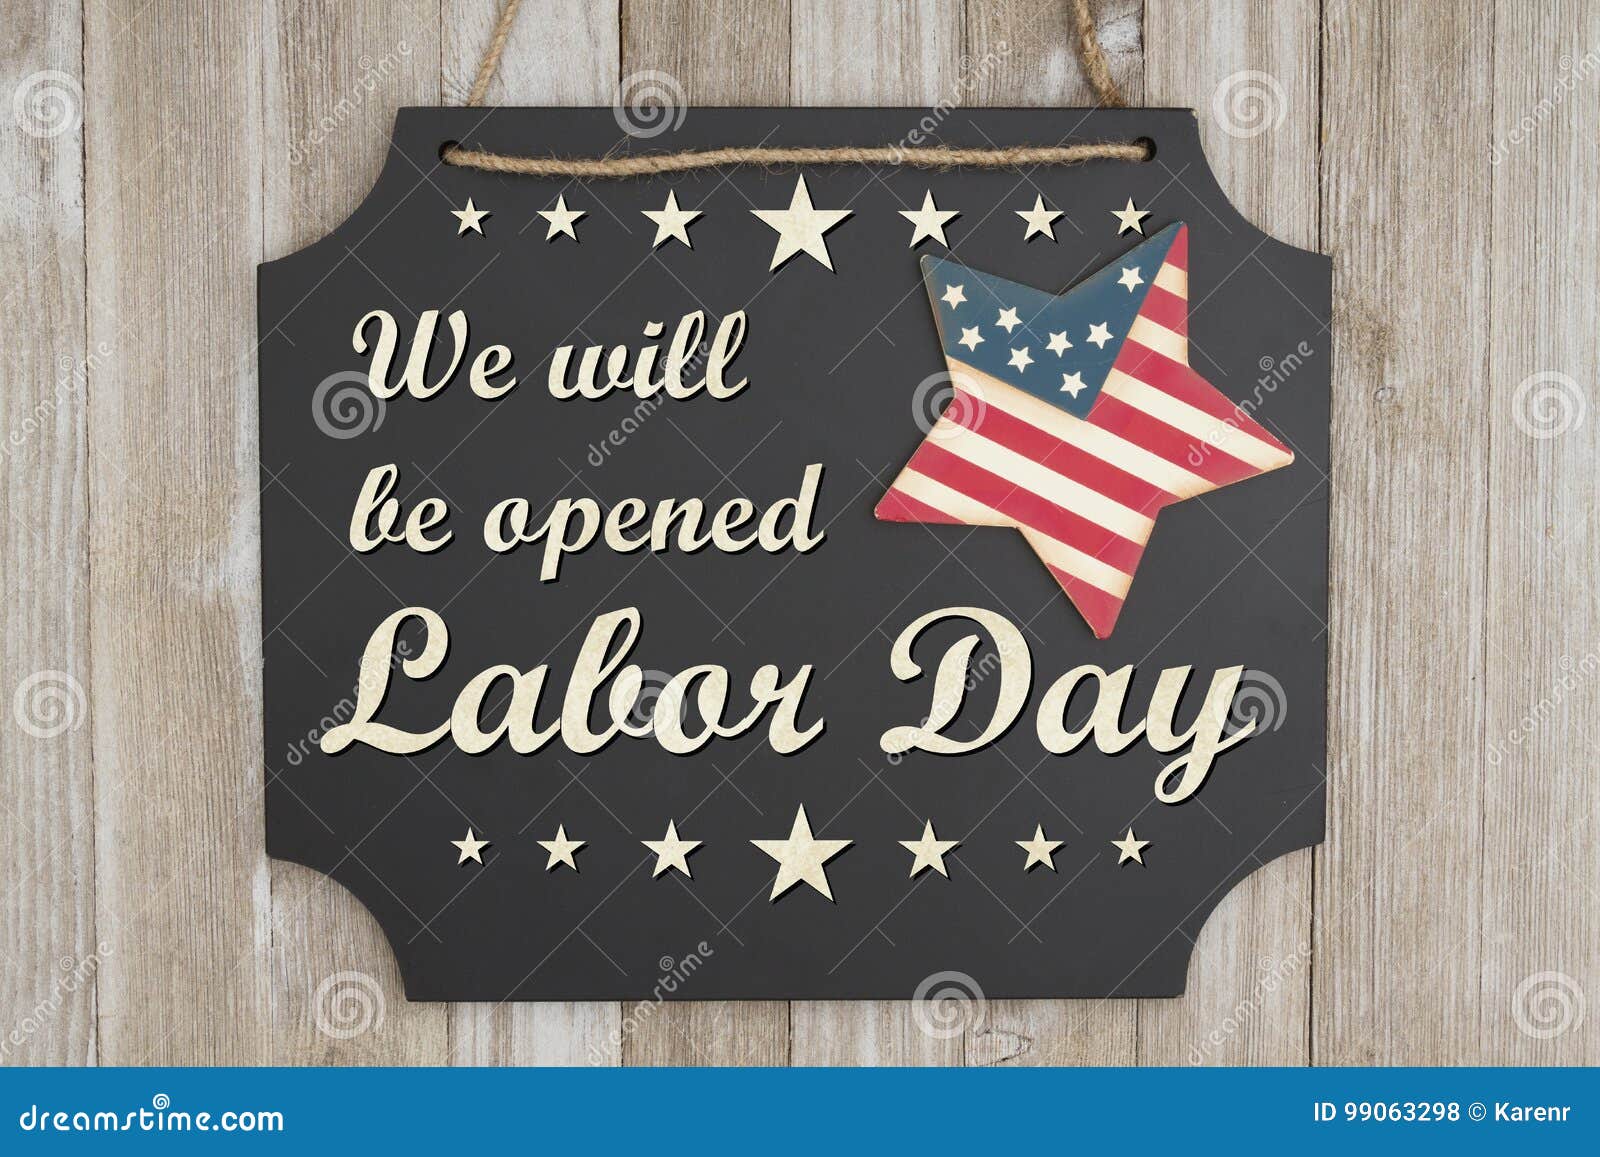 We Will Be Open Labor Day Message Stock Photo Image of united, open